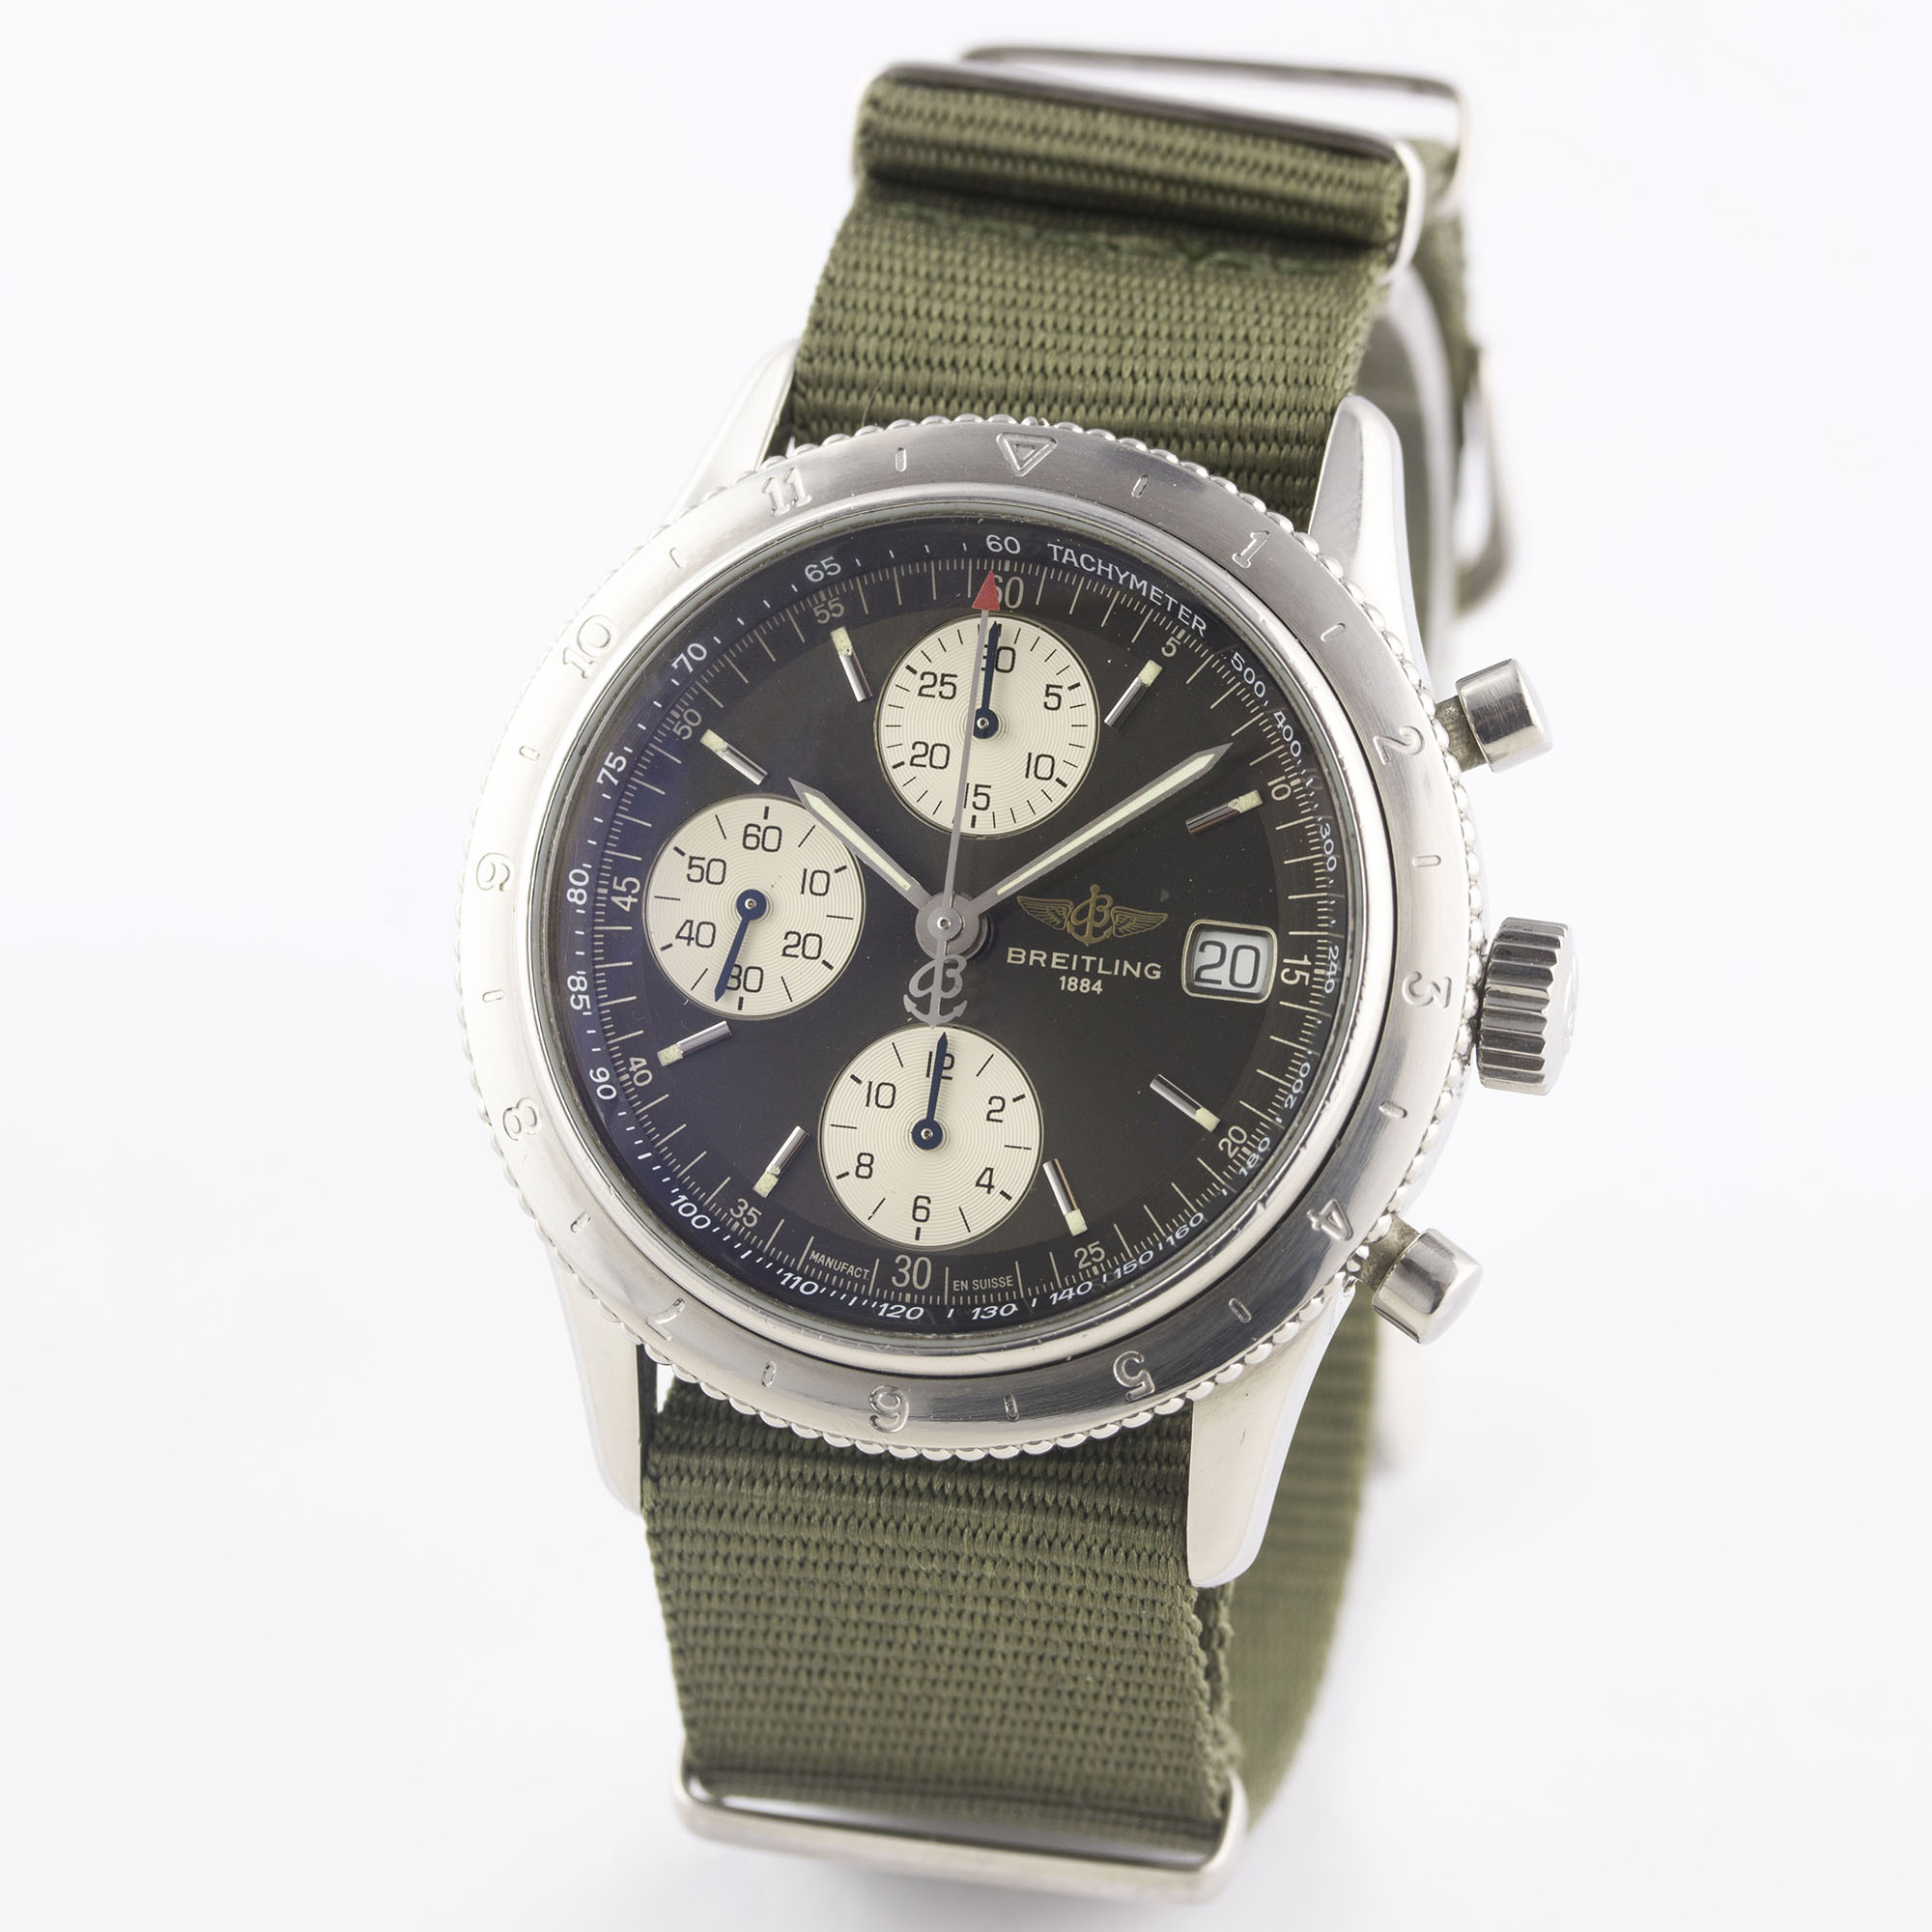 A RARE GENTLEMAN'S STAINLESS STEEL BREITLING NAVITIMER AVI AUTOMATIC CHRONOGRAPH WRIST WATCH CIRCA - Image 4 of 8